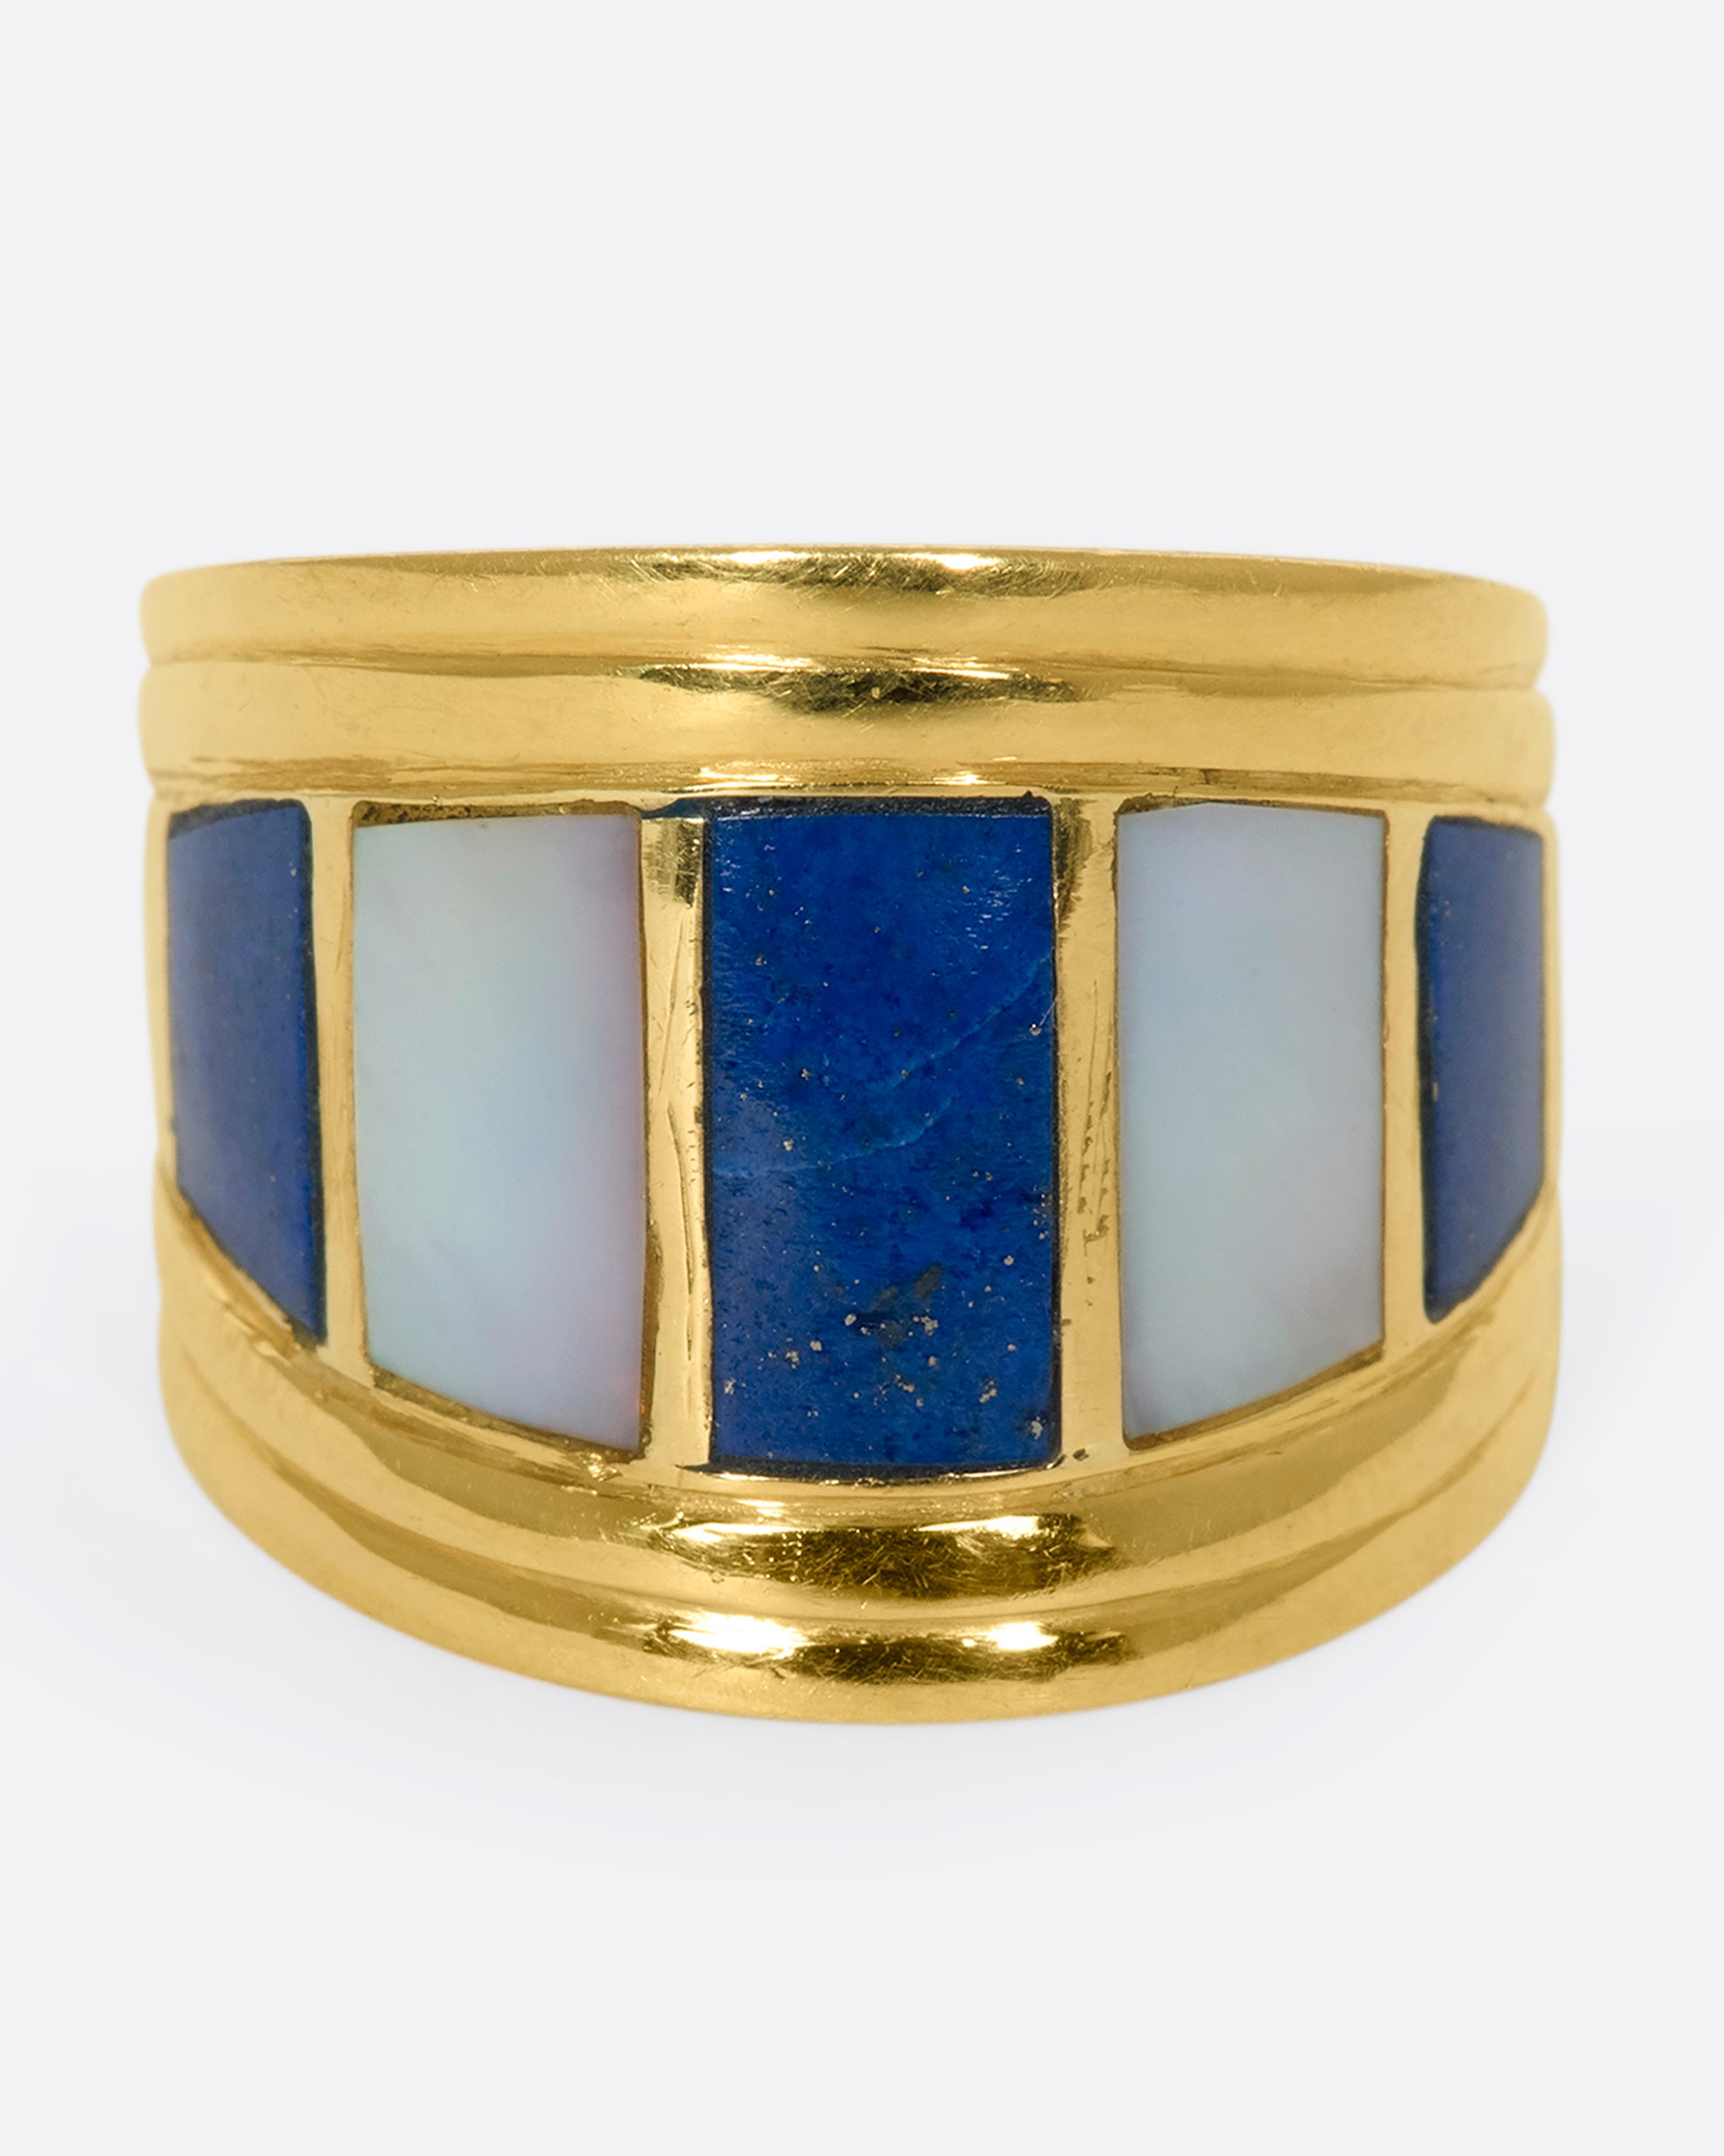 A forward view of a wide, tapered yellow gold ring with mother of pearl and lapis inlaid stripes.